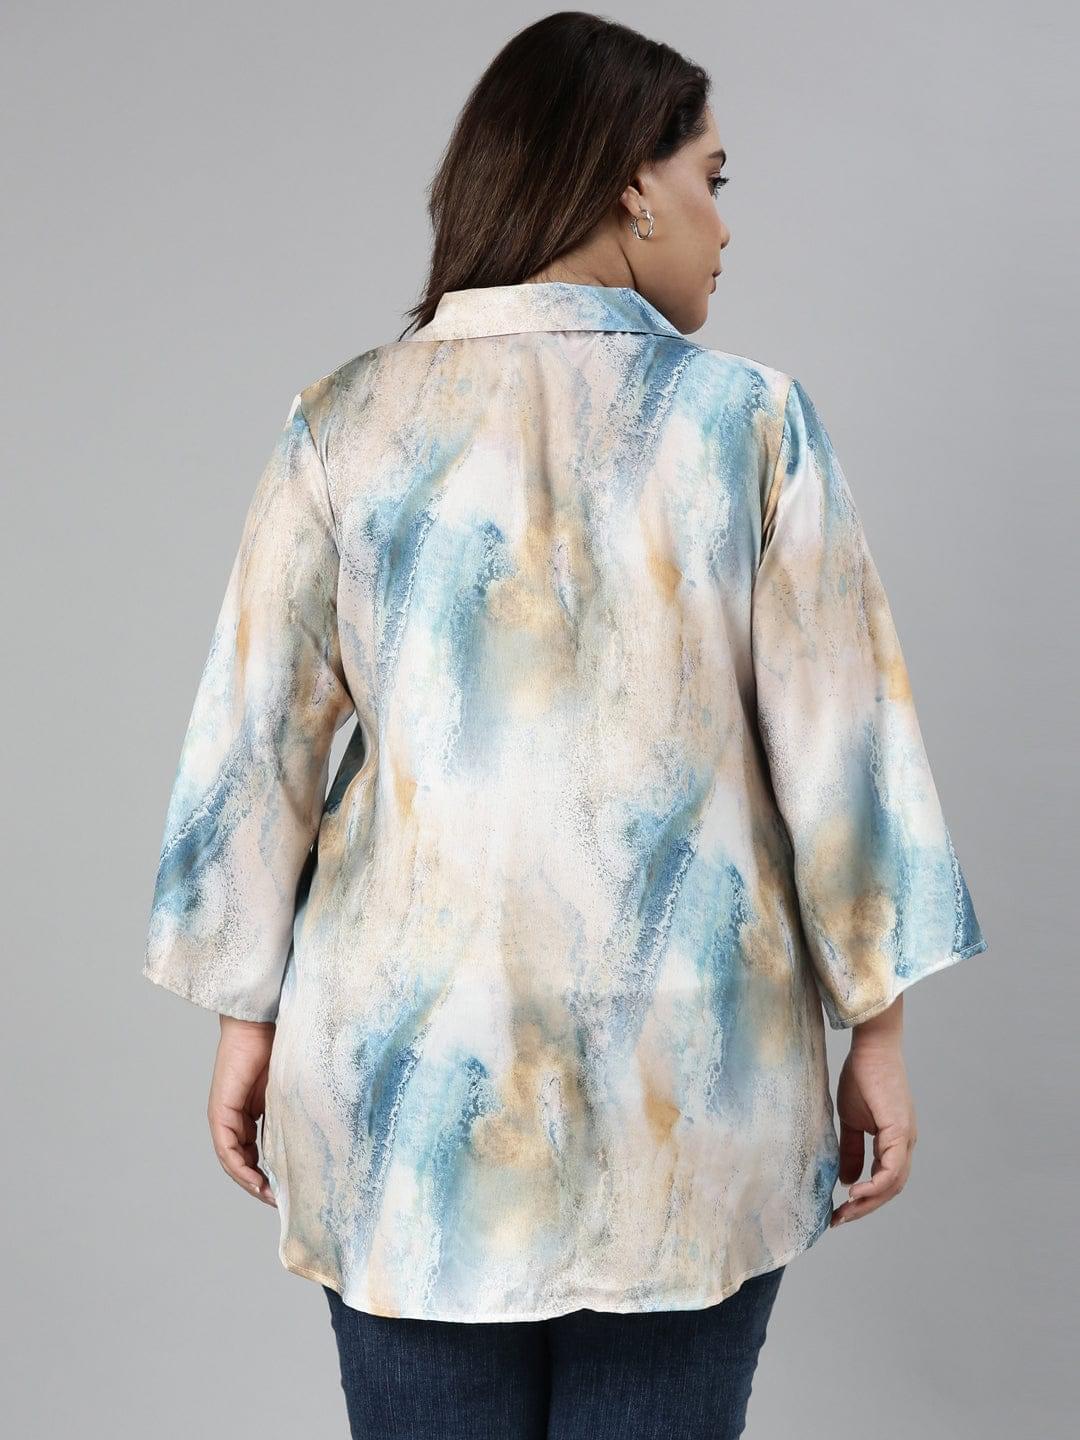 Multicolored satin shirt: A chic blend of vibrant colors in a luxurious satin fabric. Elevate your style with this versatile and eye-catching wardrobe essential